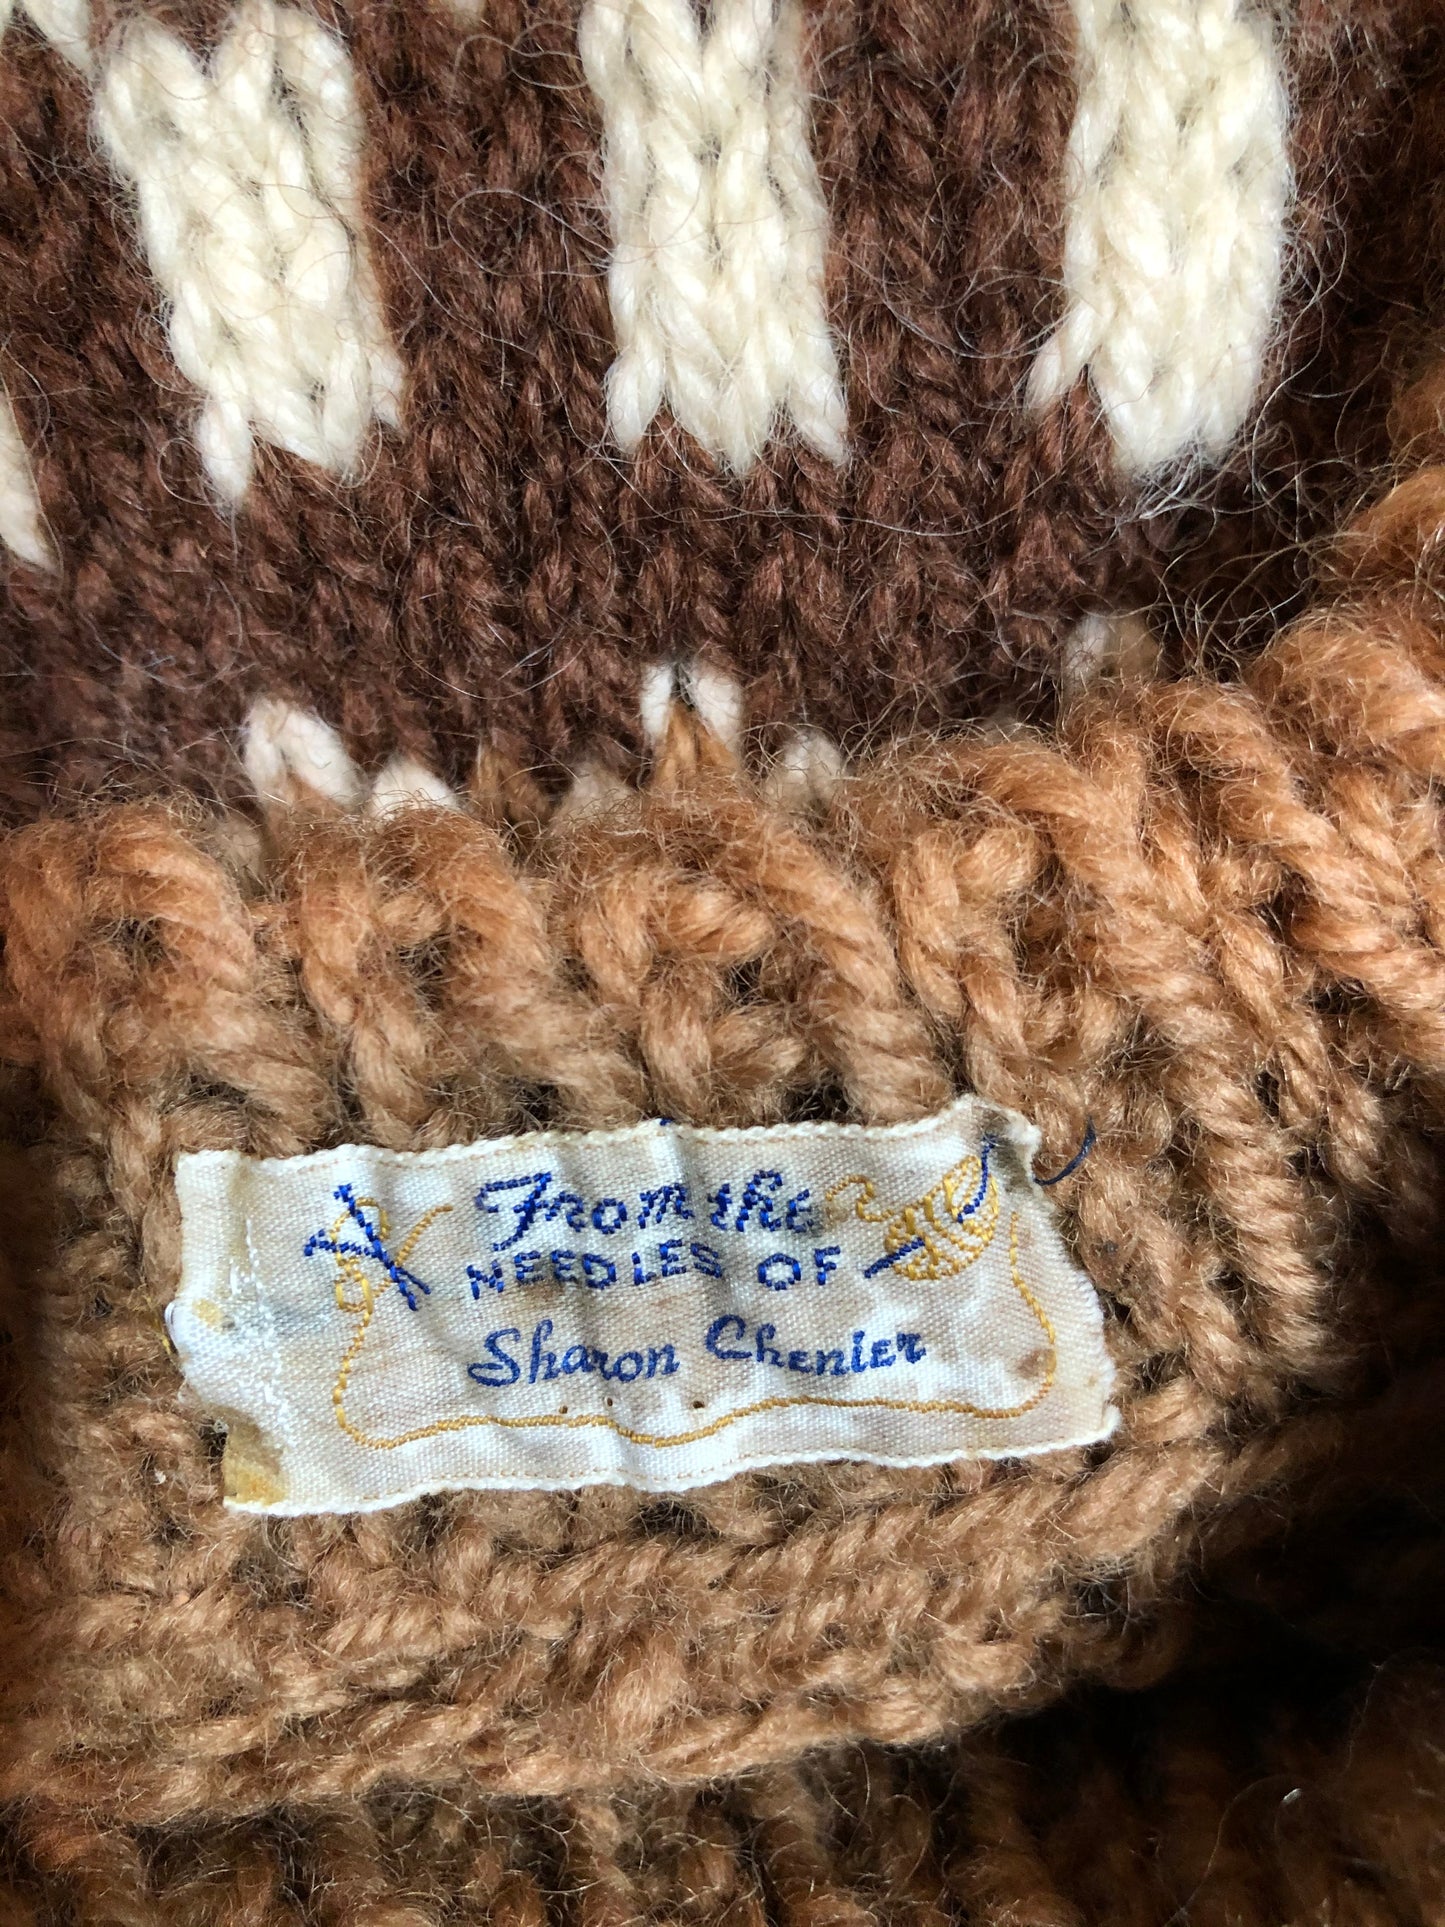 Kingspier Vintage - Handknit lopi sweater with warm brown and white design. Fibres unknown. Made in Nova Scotia, Canada. Size medium. 